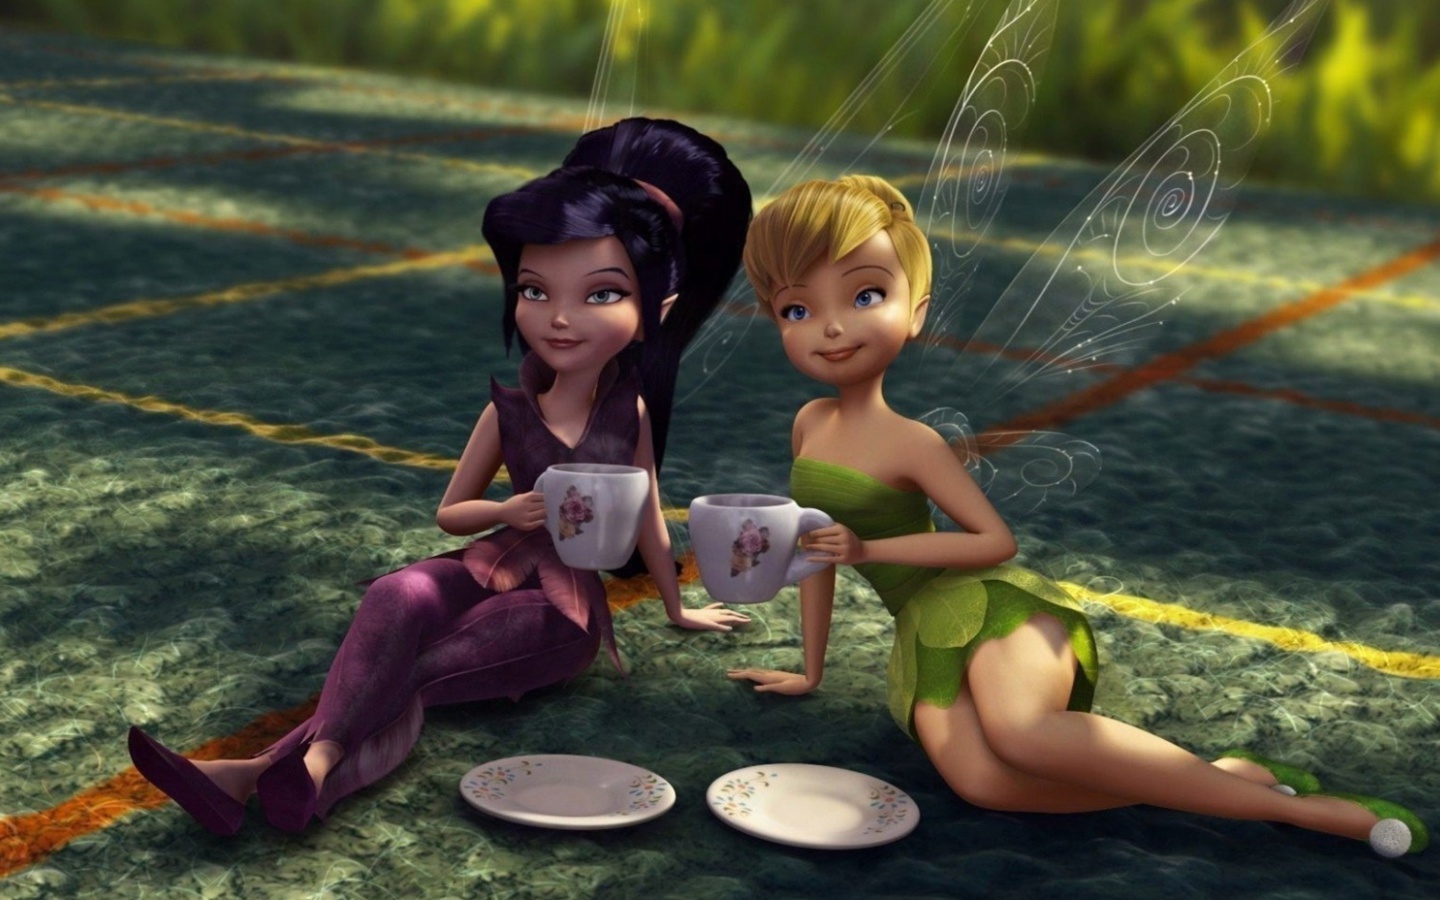 Fondo de pantalla Tinker Bell And The Great Fairy Rescue 1440x900